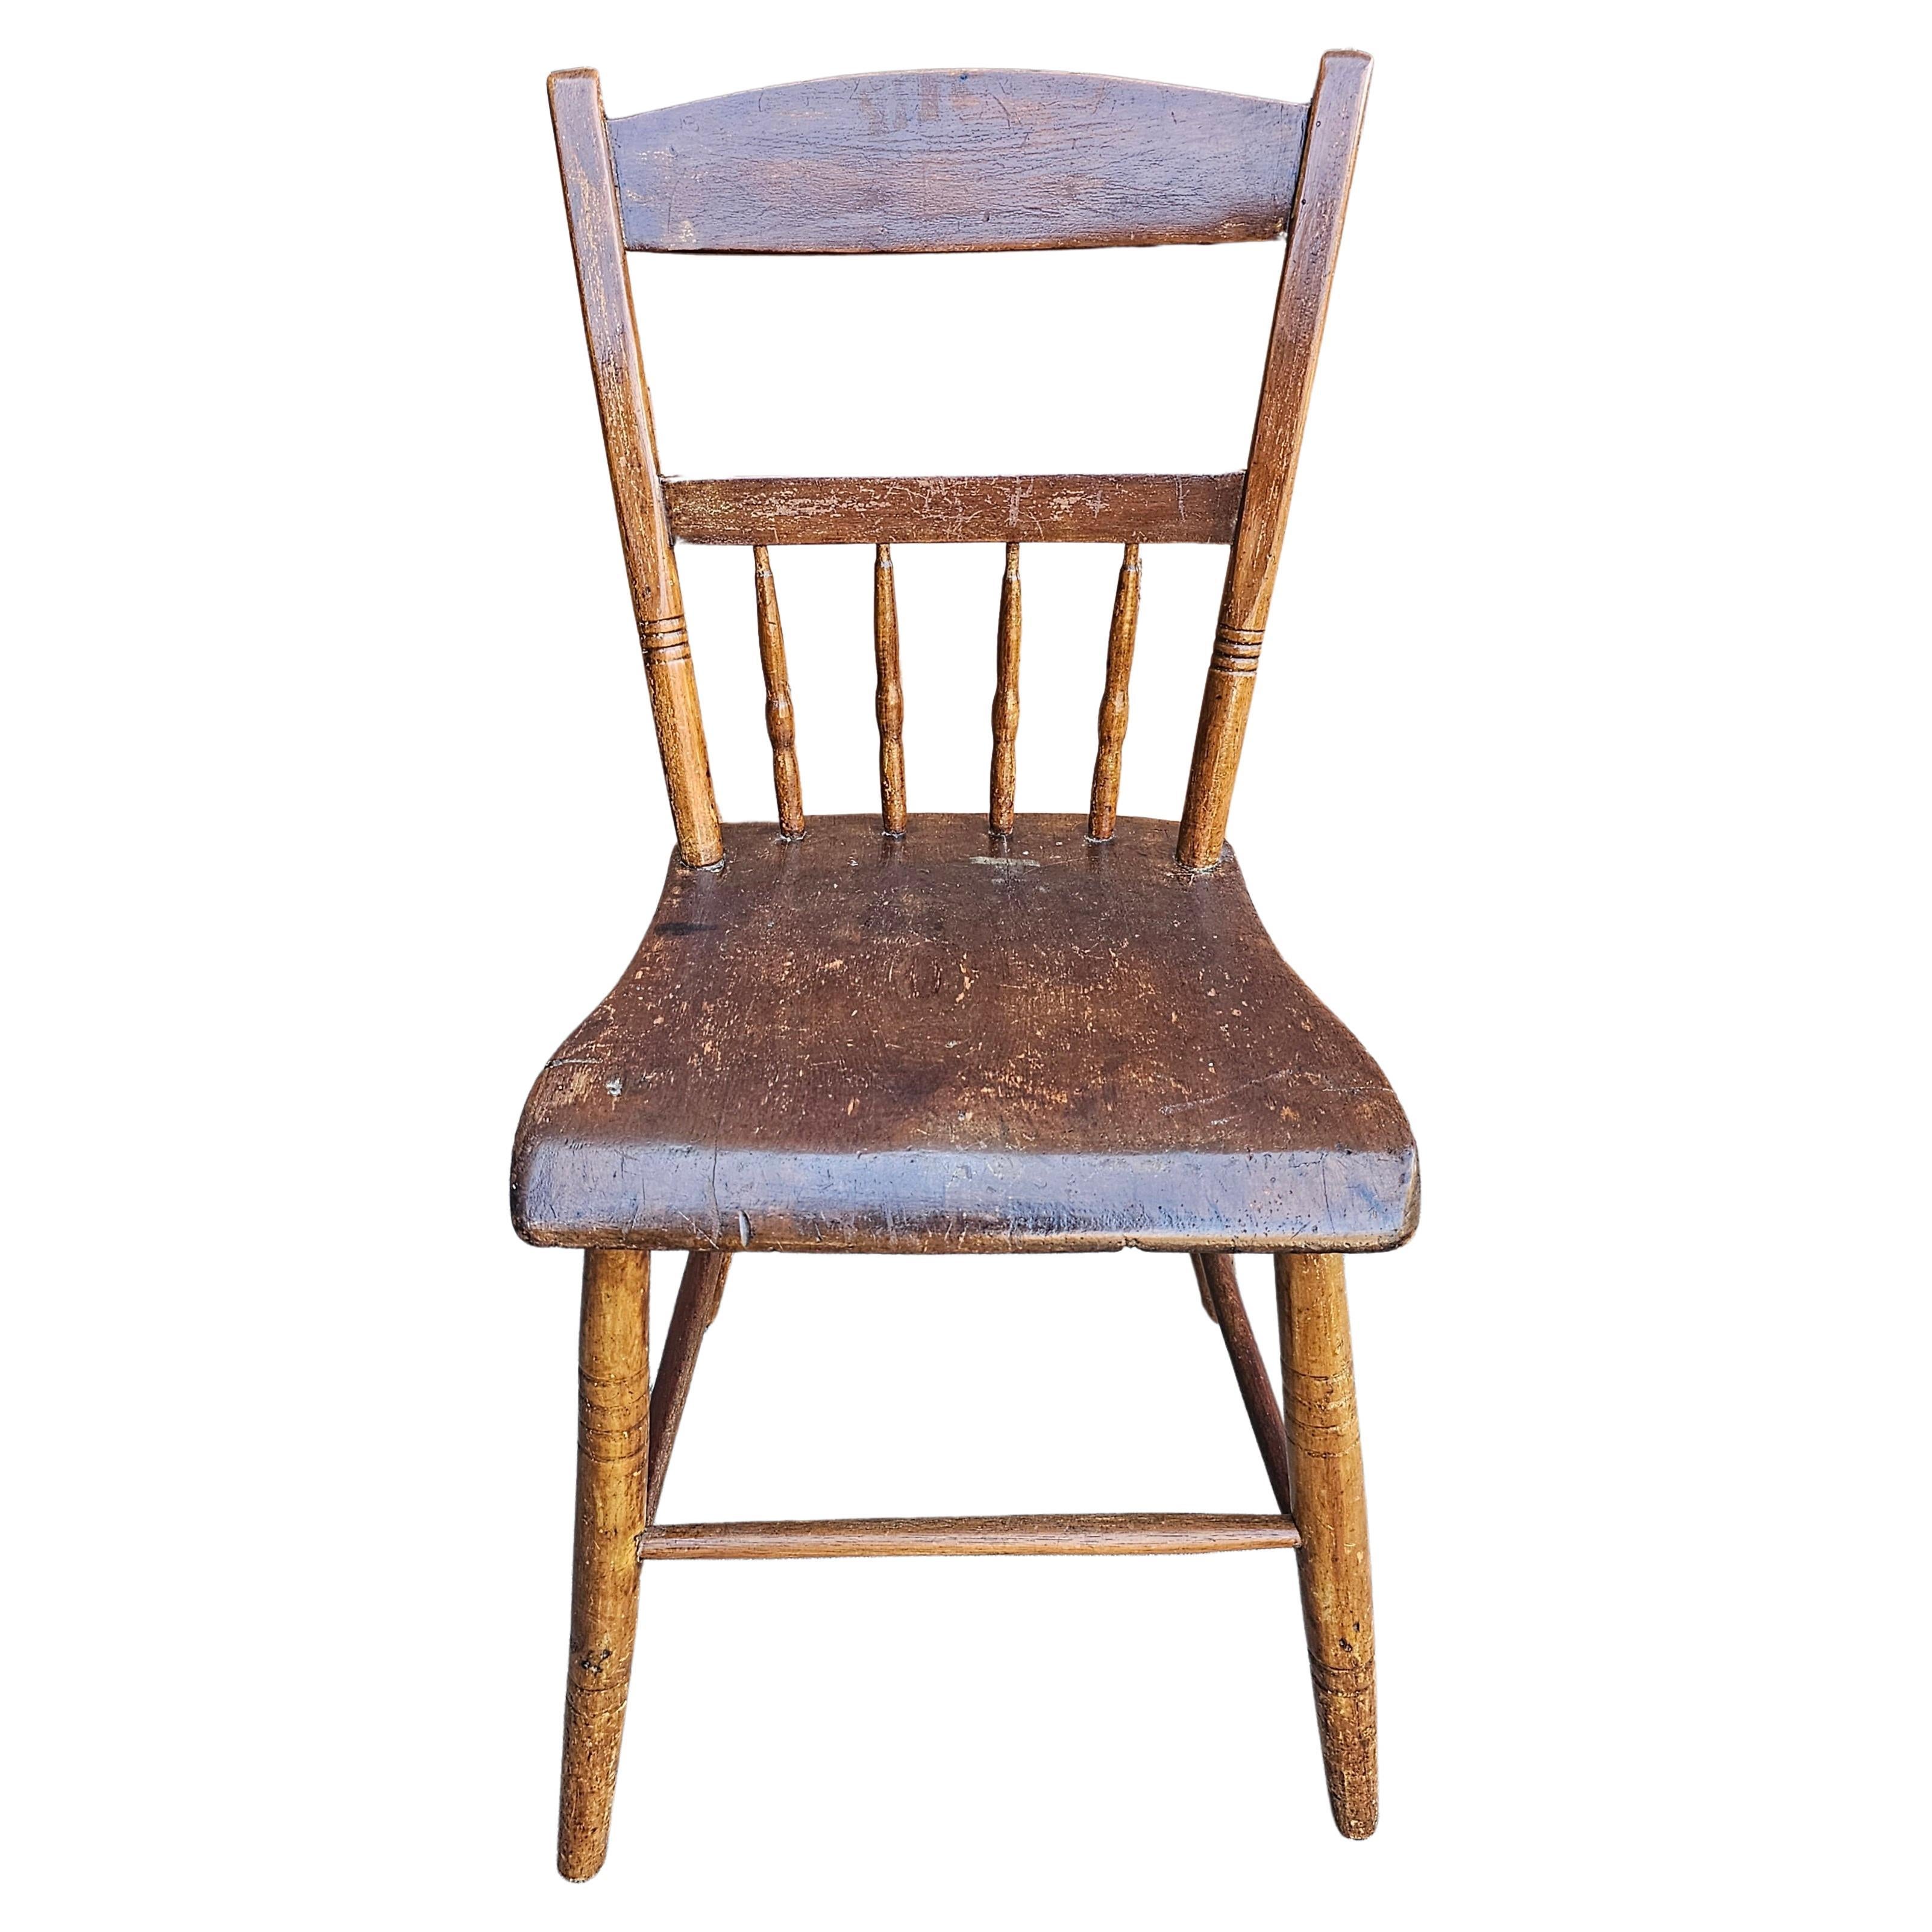 19th Century Early American Style Maple Ladder and Spindle Back Plank Side Chair For Sale